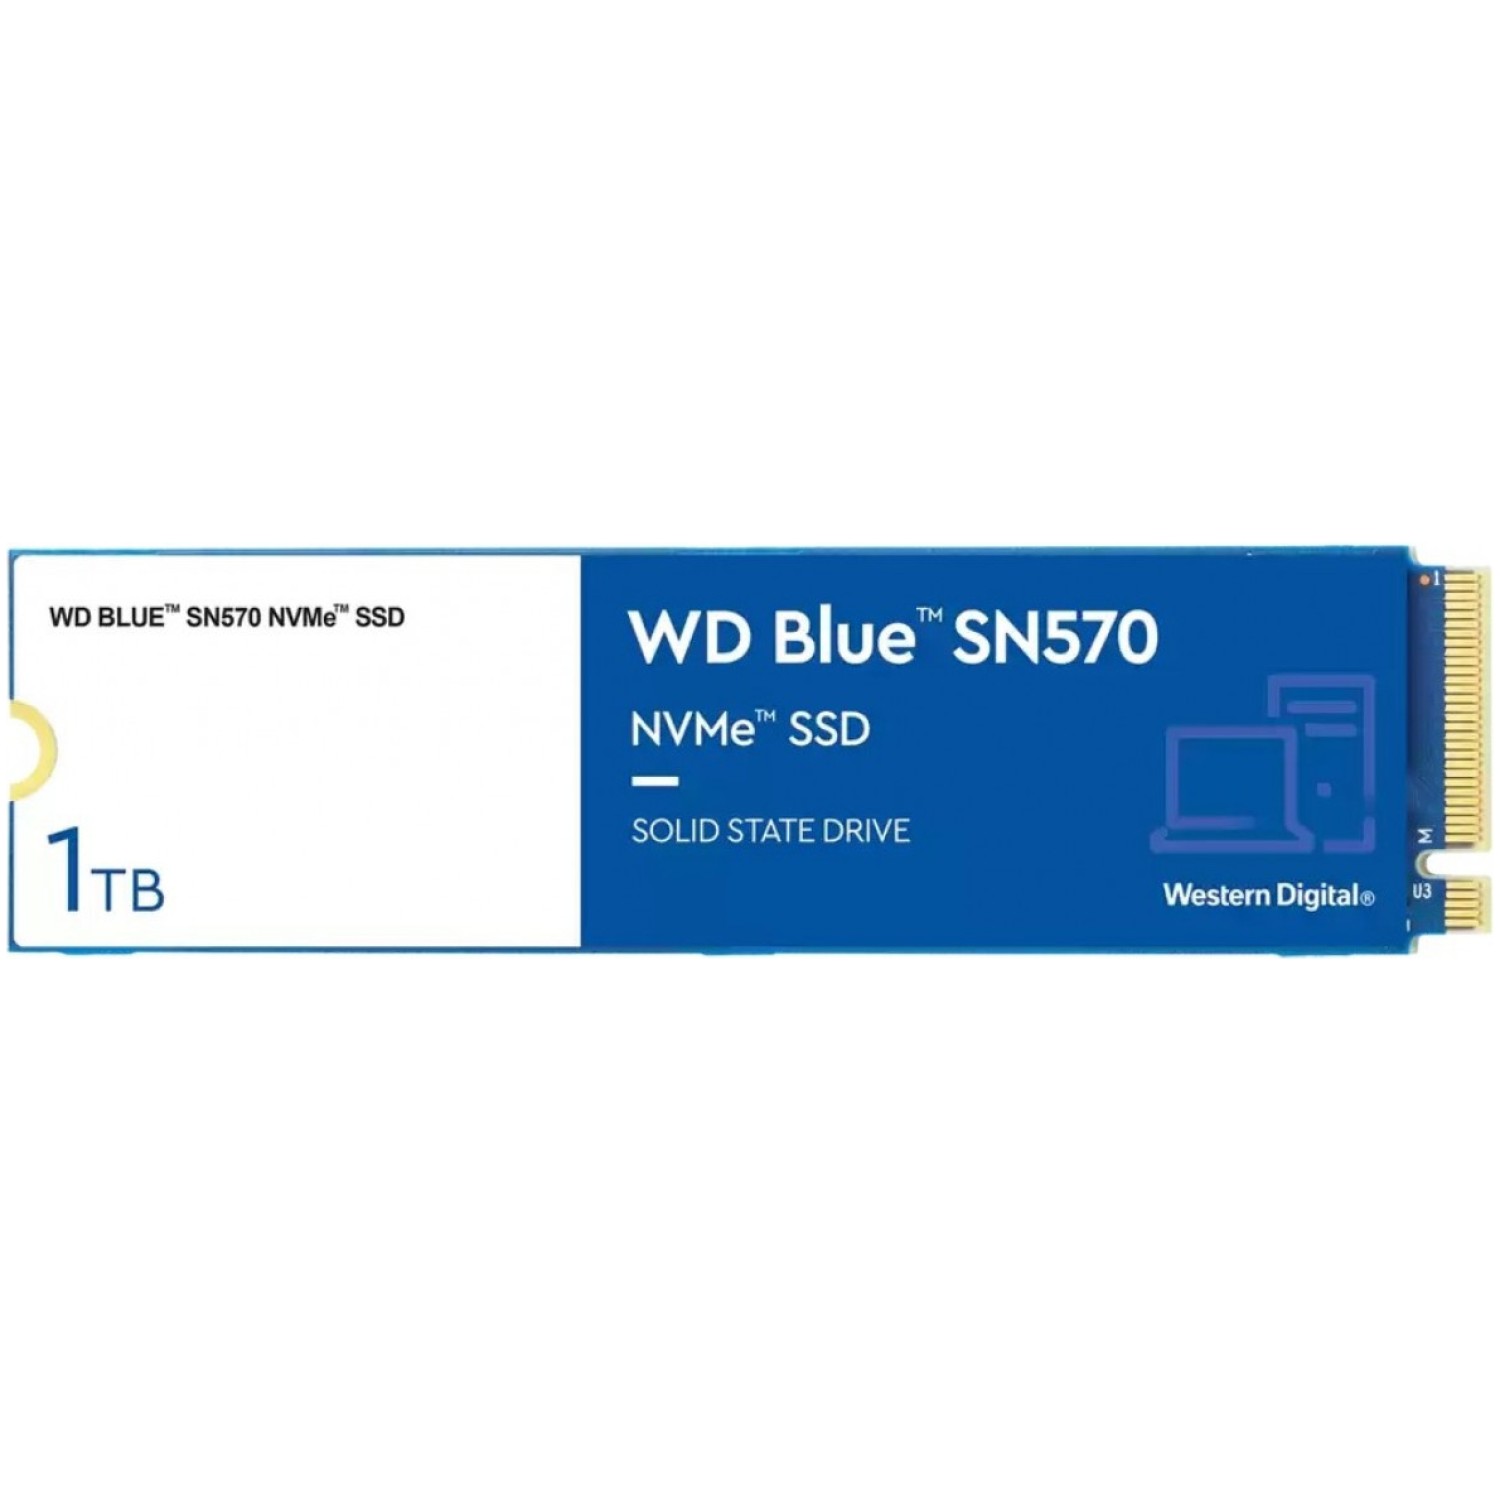 Disk SSD M.2 NVMe PCIe 3.0 1TB WD SN570 Blue Gaming 2280 3500/3000MB/s (WDS100T3B0C)